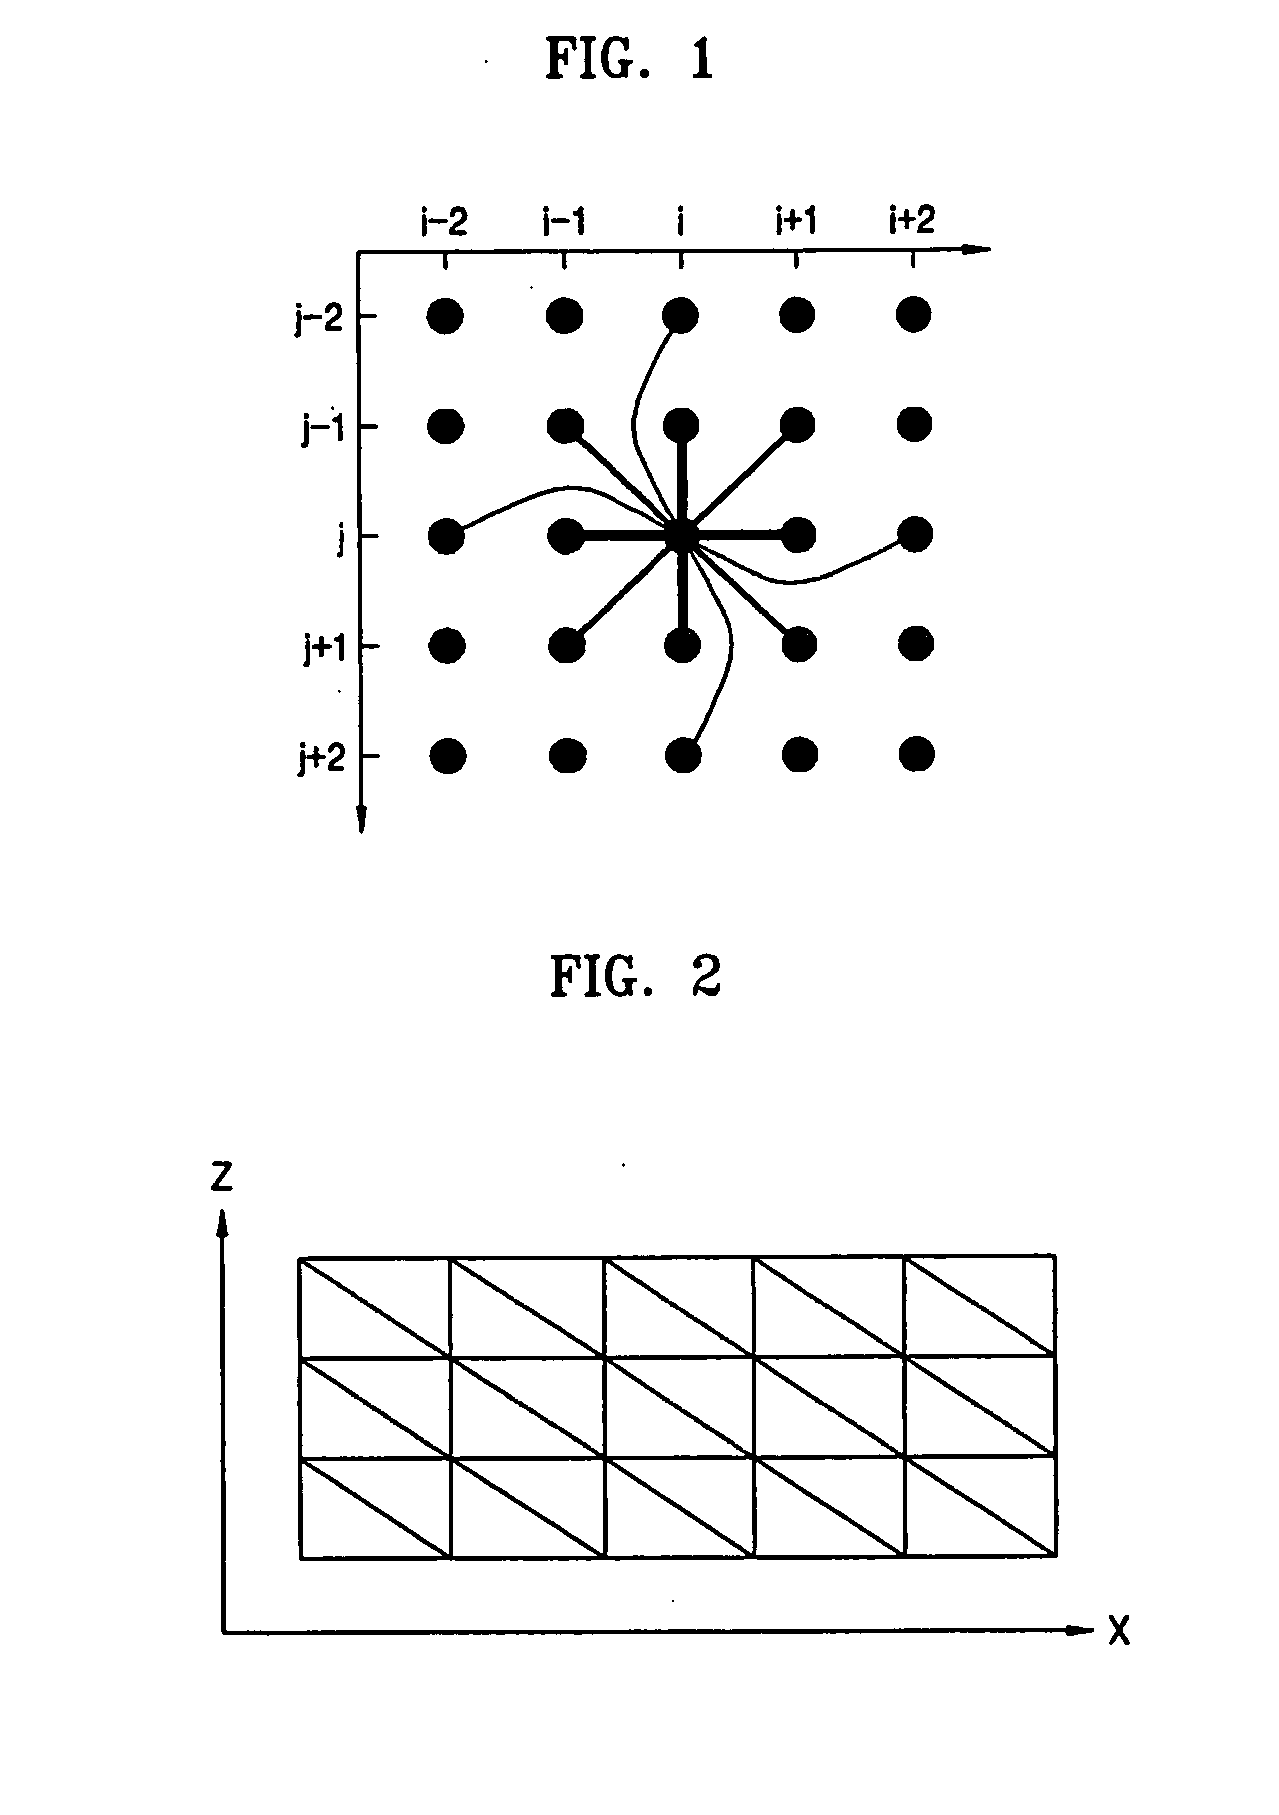 Data structure for cloth animation, and apparatus and method for rendering three-dimensional graphics data using the data structure